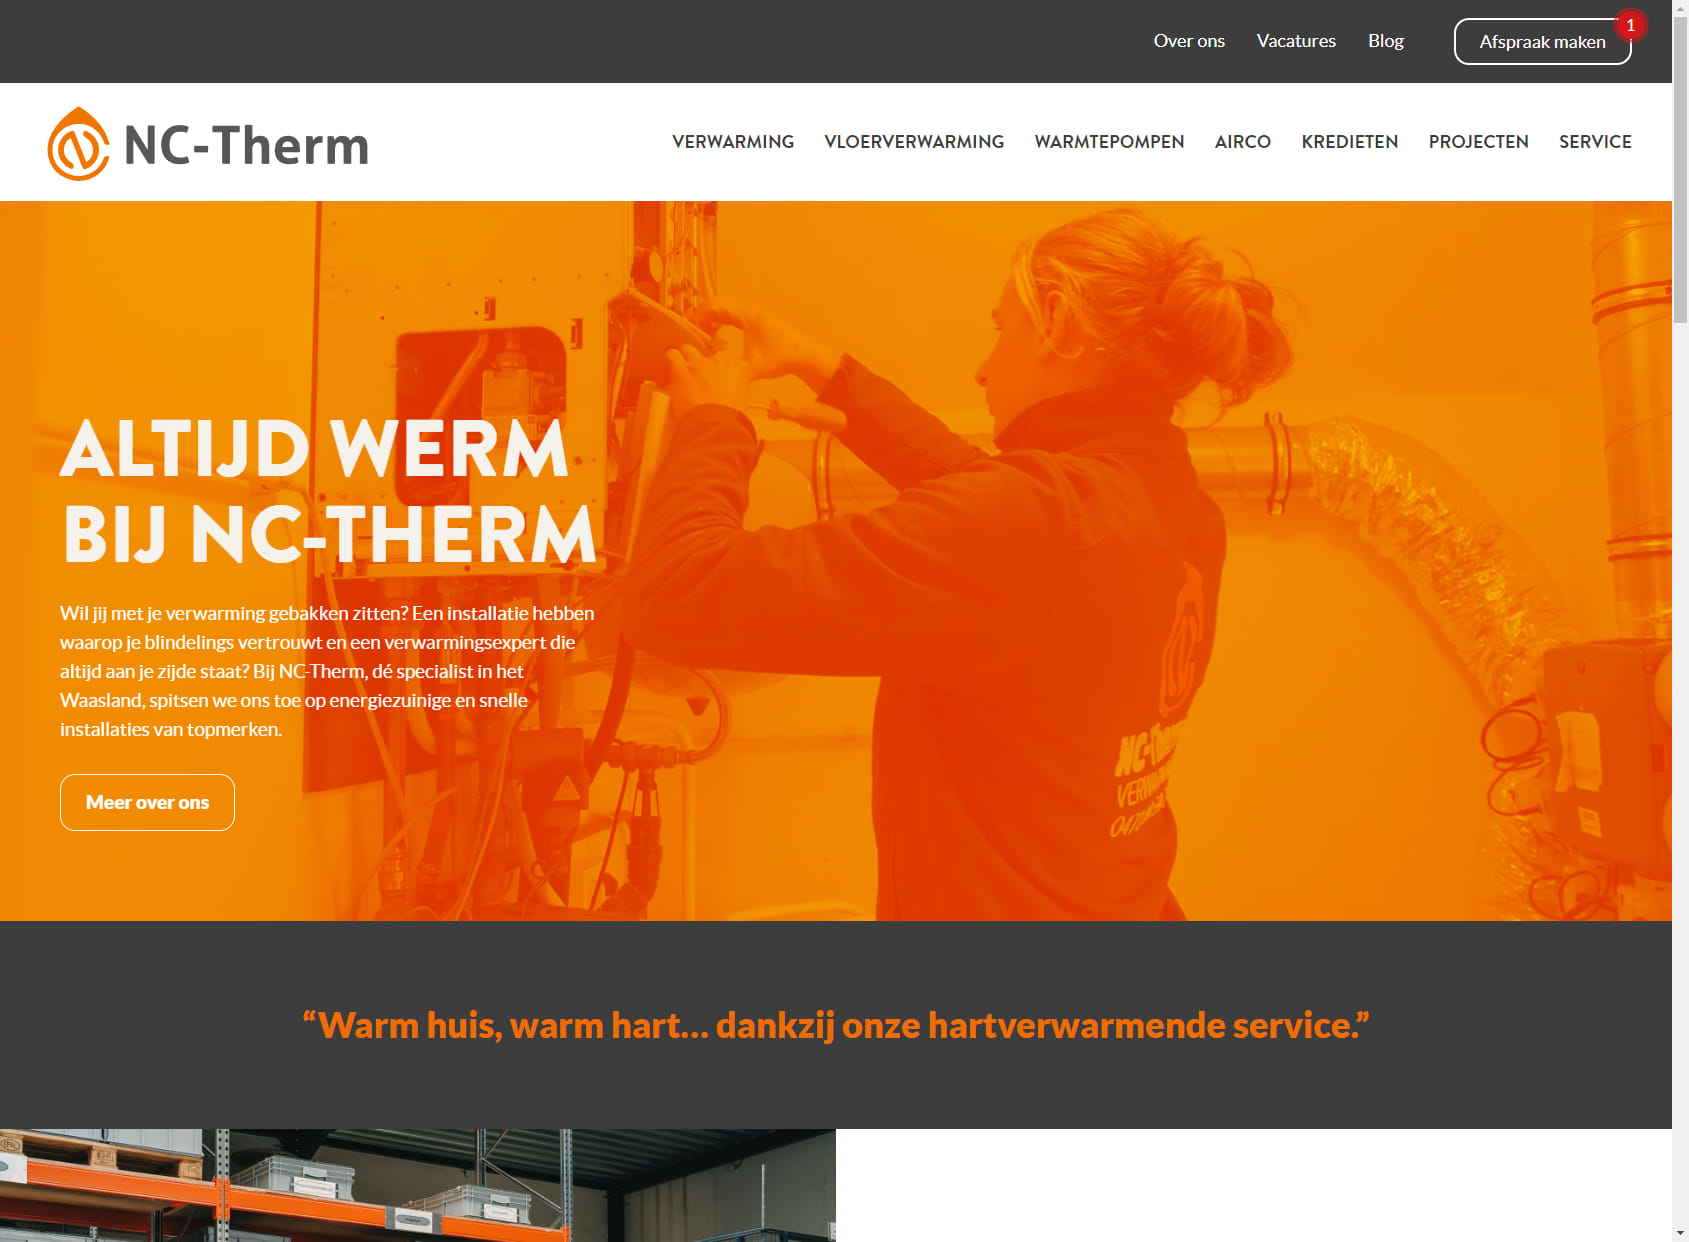 NC-Therm